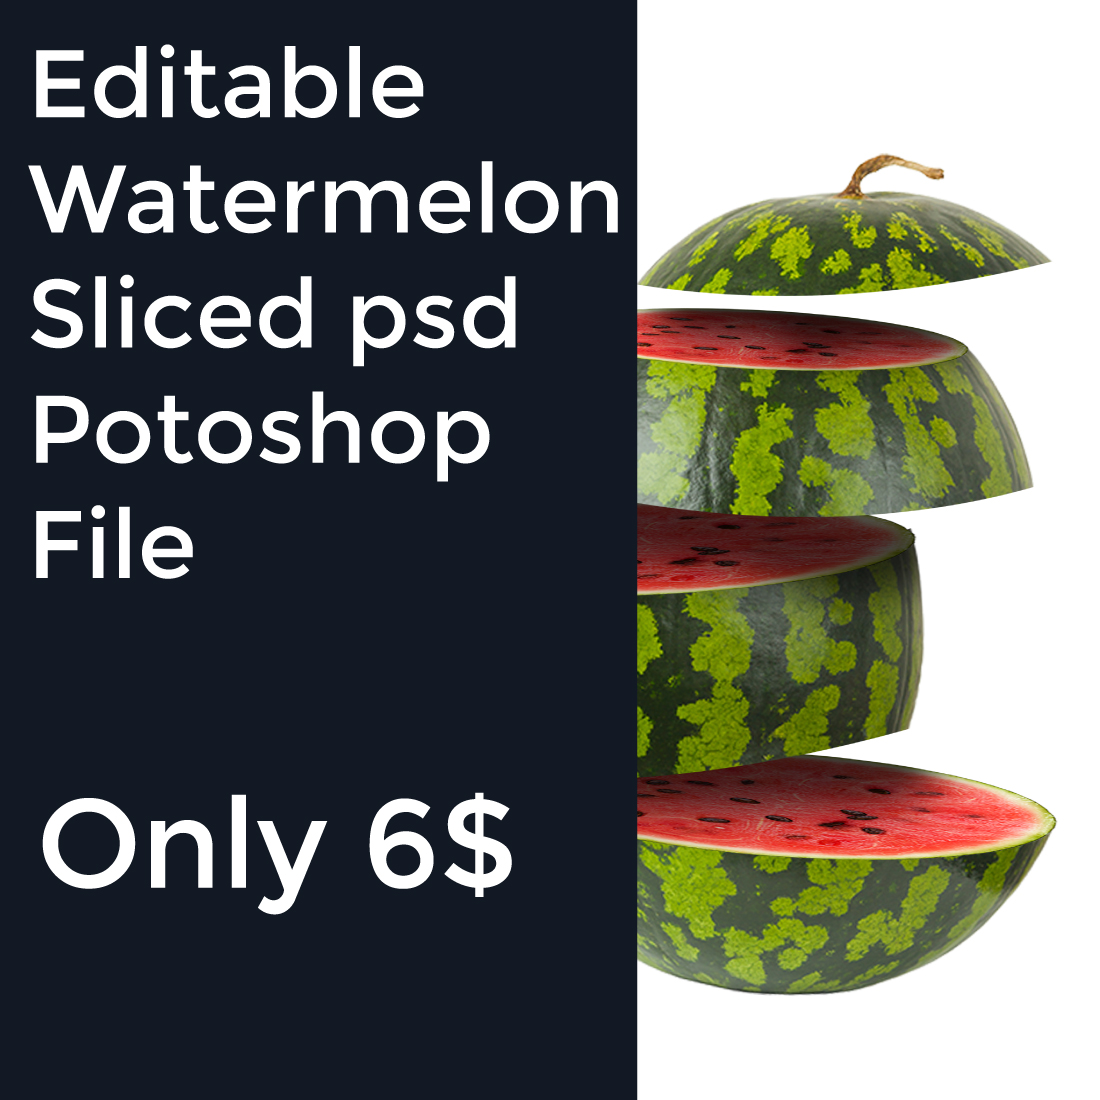 Editable Watermelon sliced psd File - only 6$ cover image.